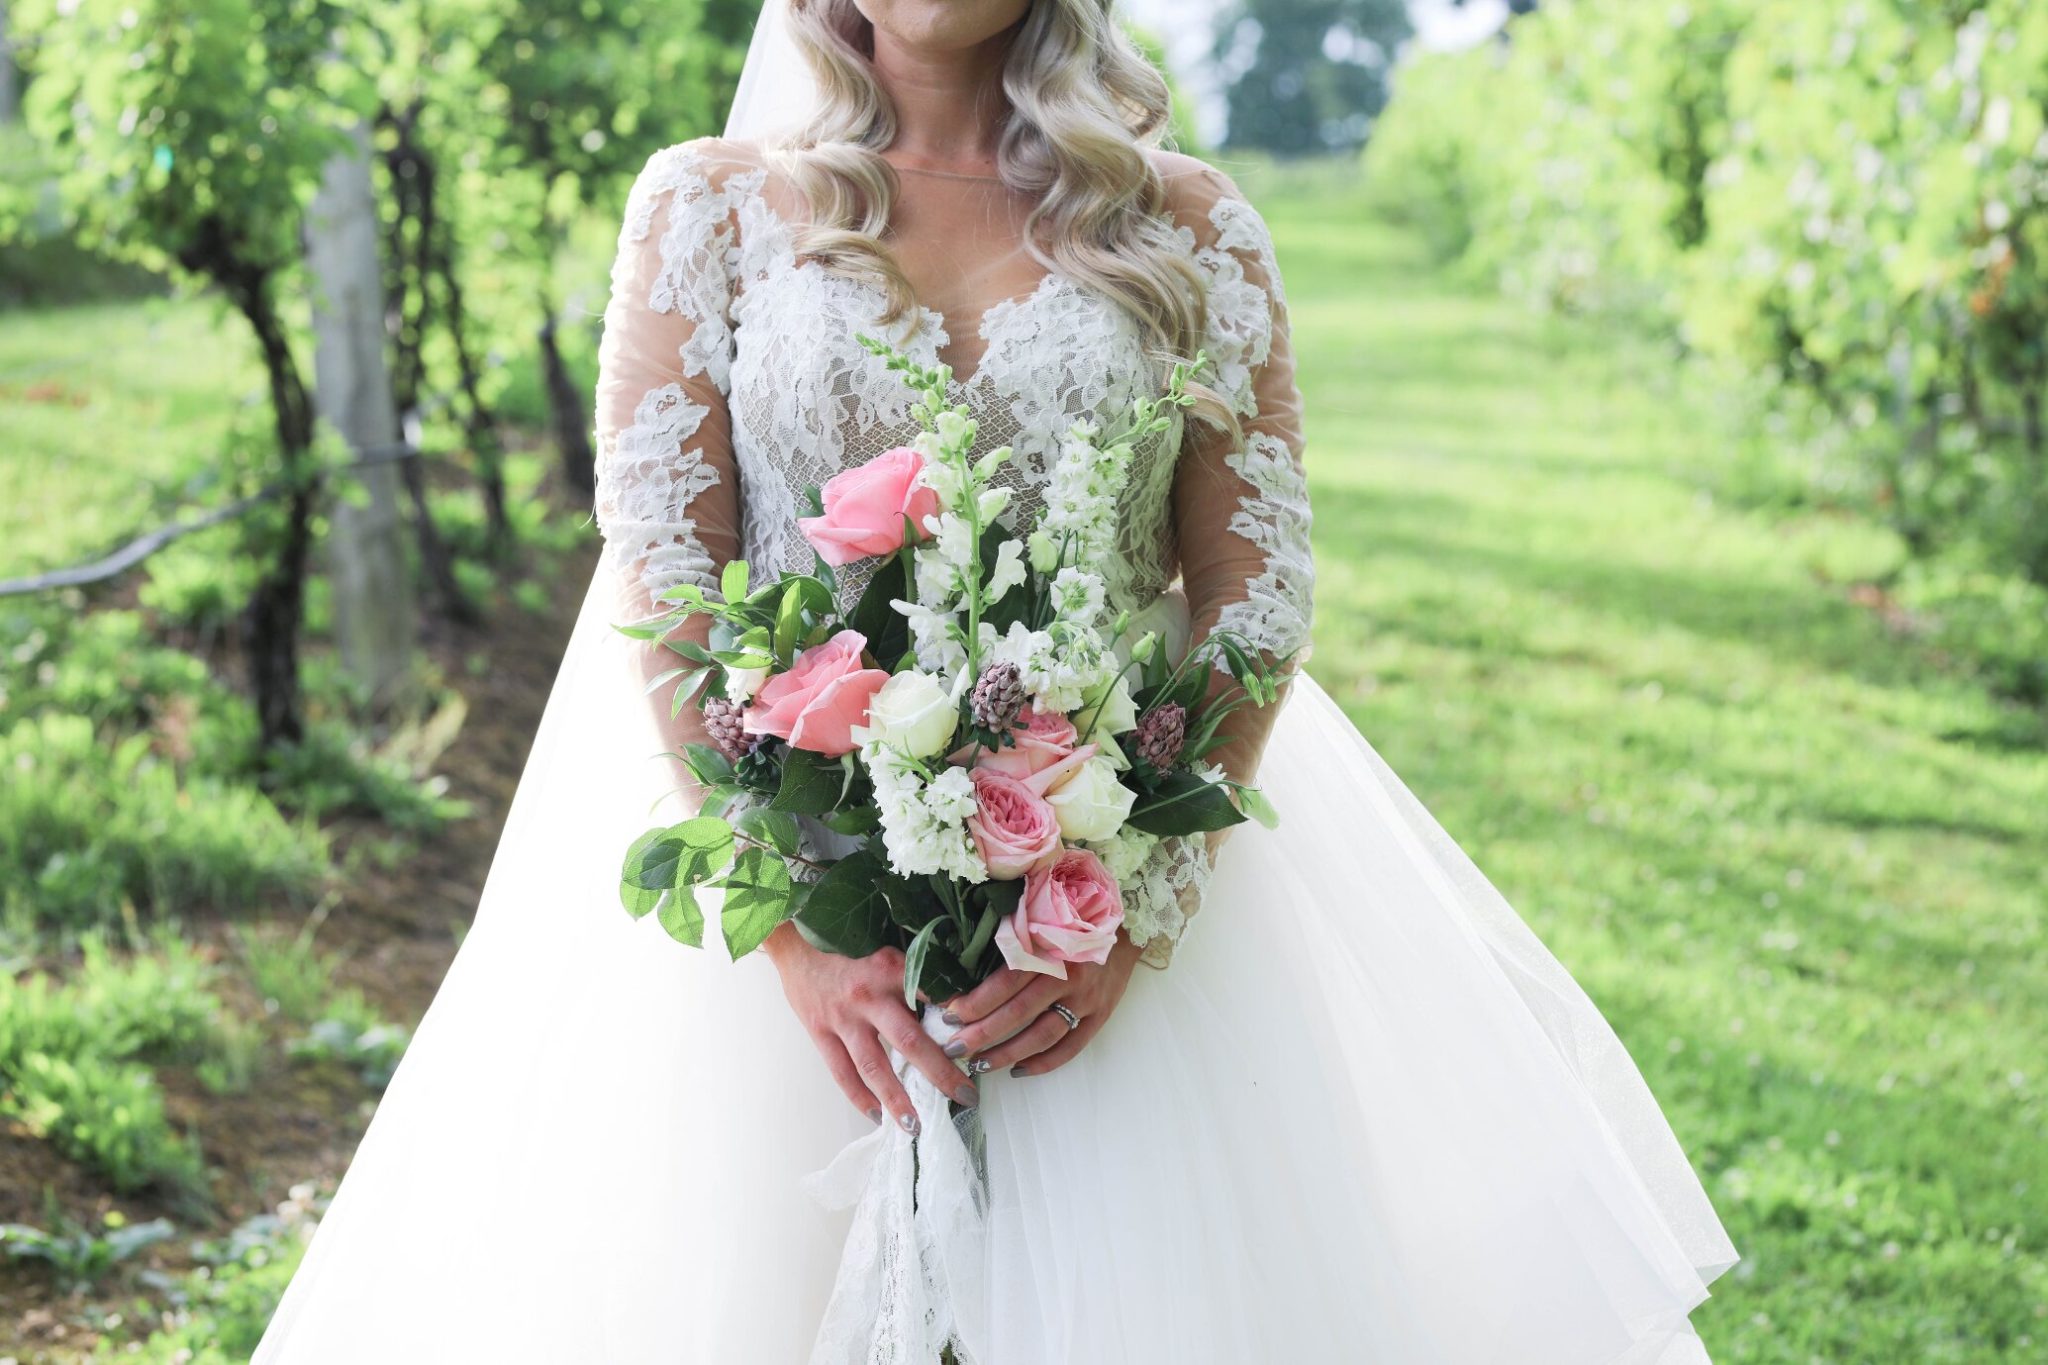 Romantic Hailey Paige Lace and Tull Ballgown Bridal Dress